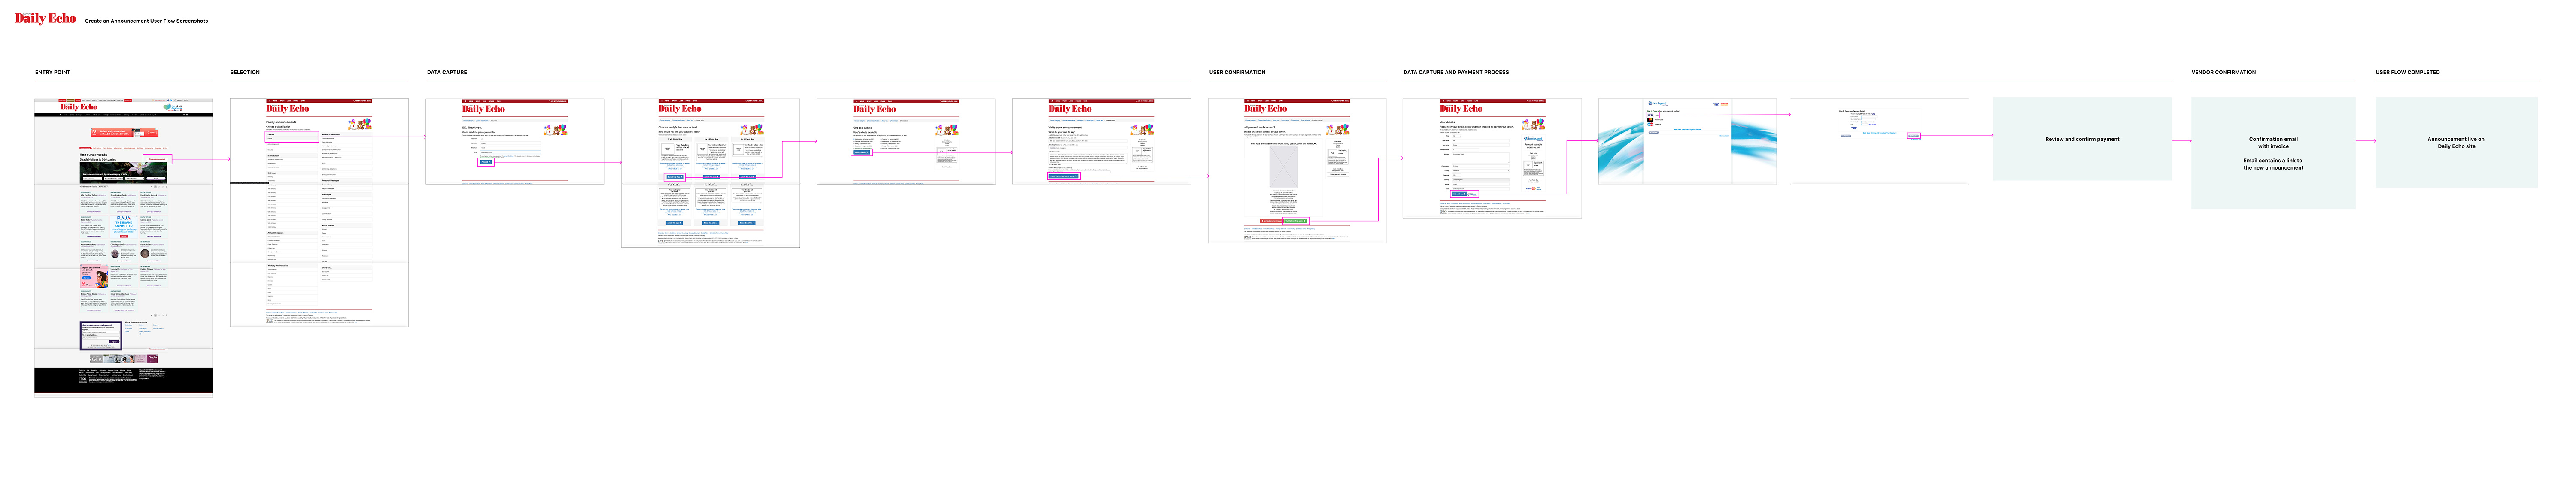 Screenshots of the Daily echo site as a user flow